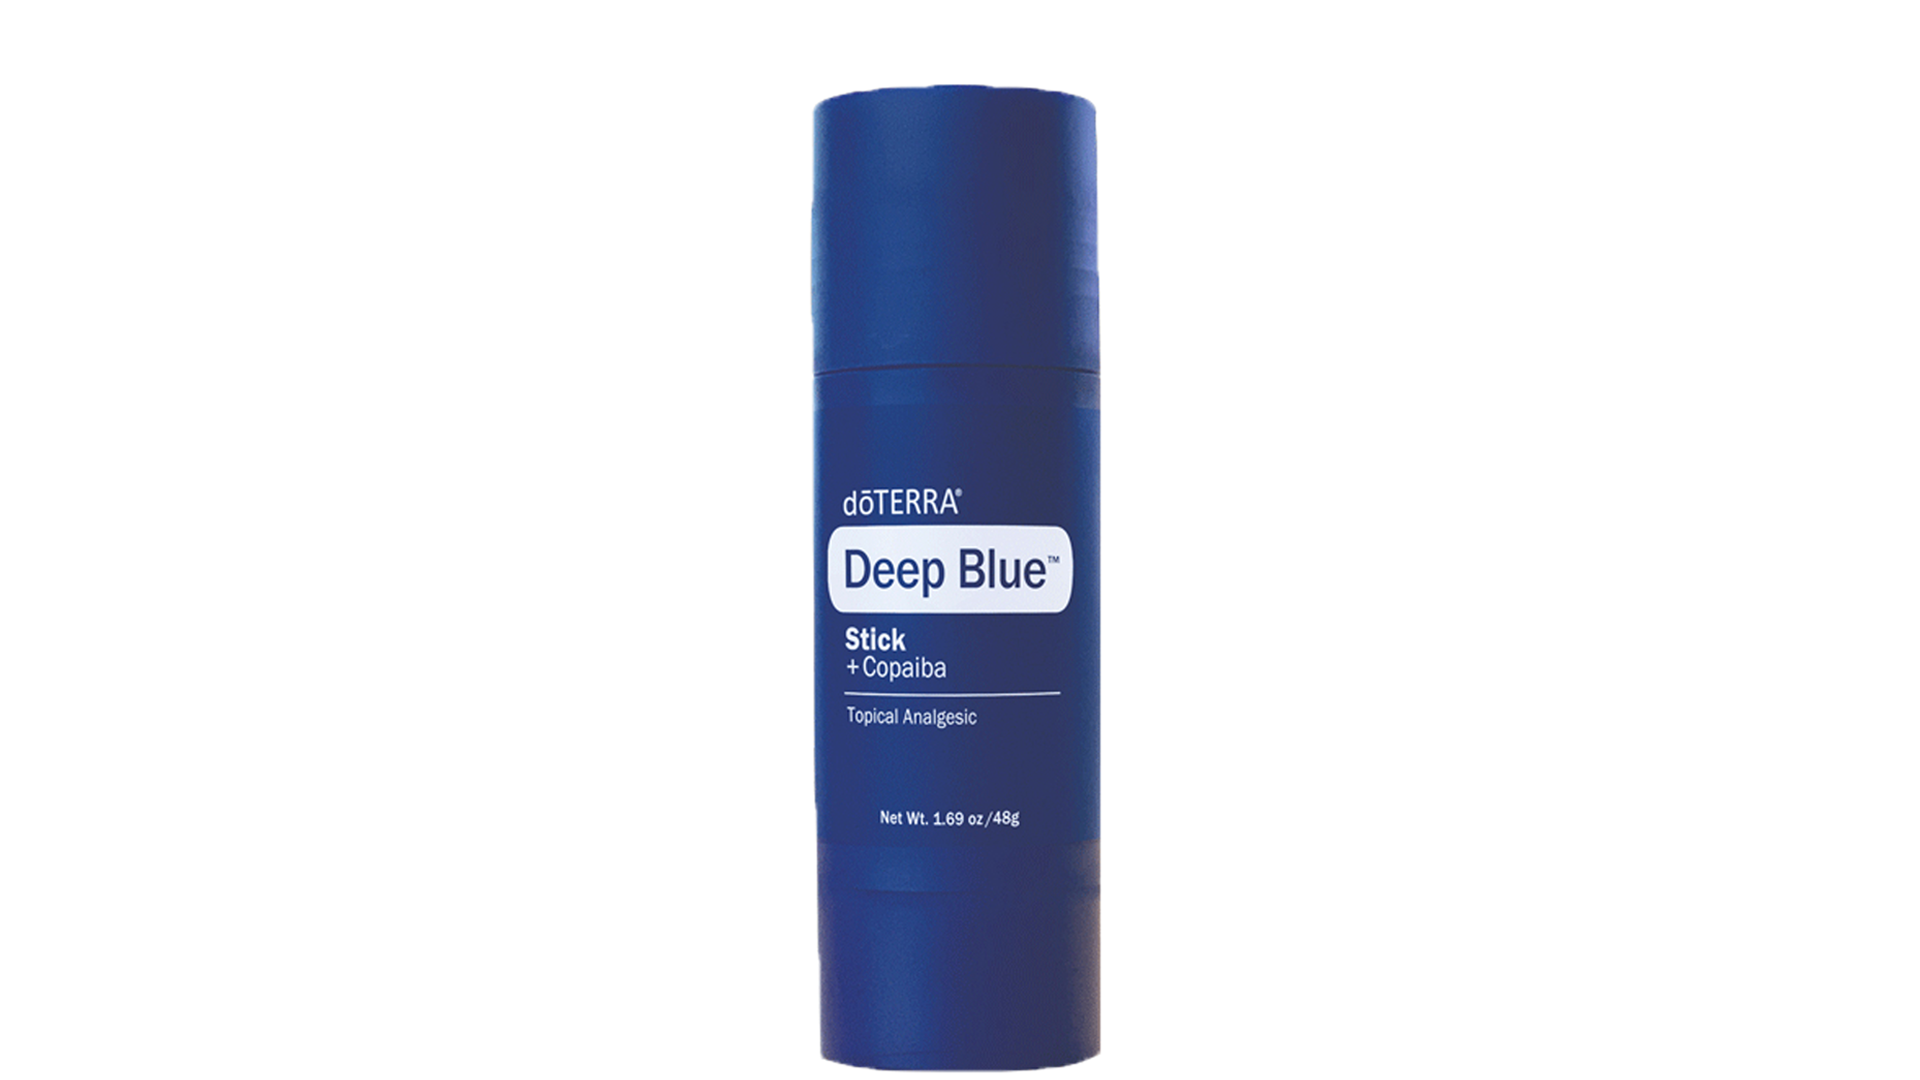 Deep Blue Studio Hair Products - wide 2